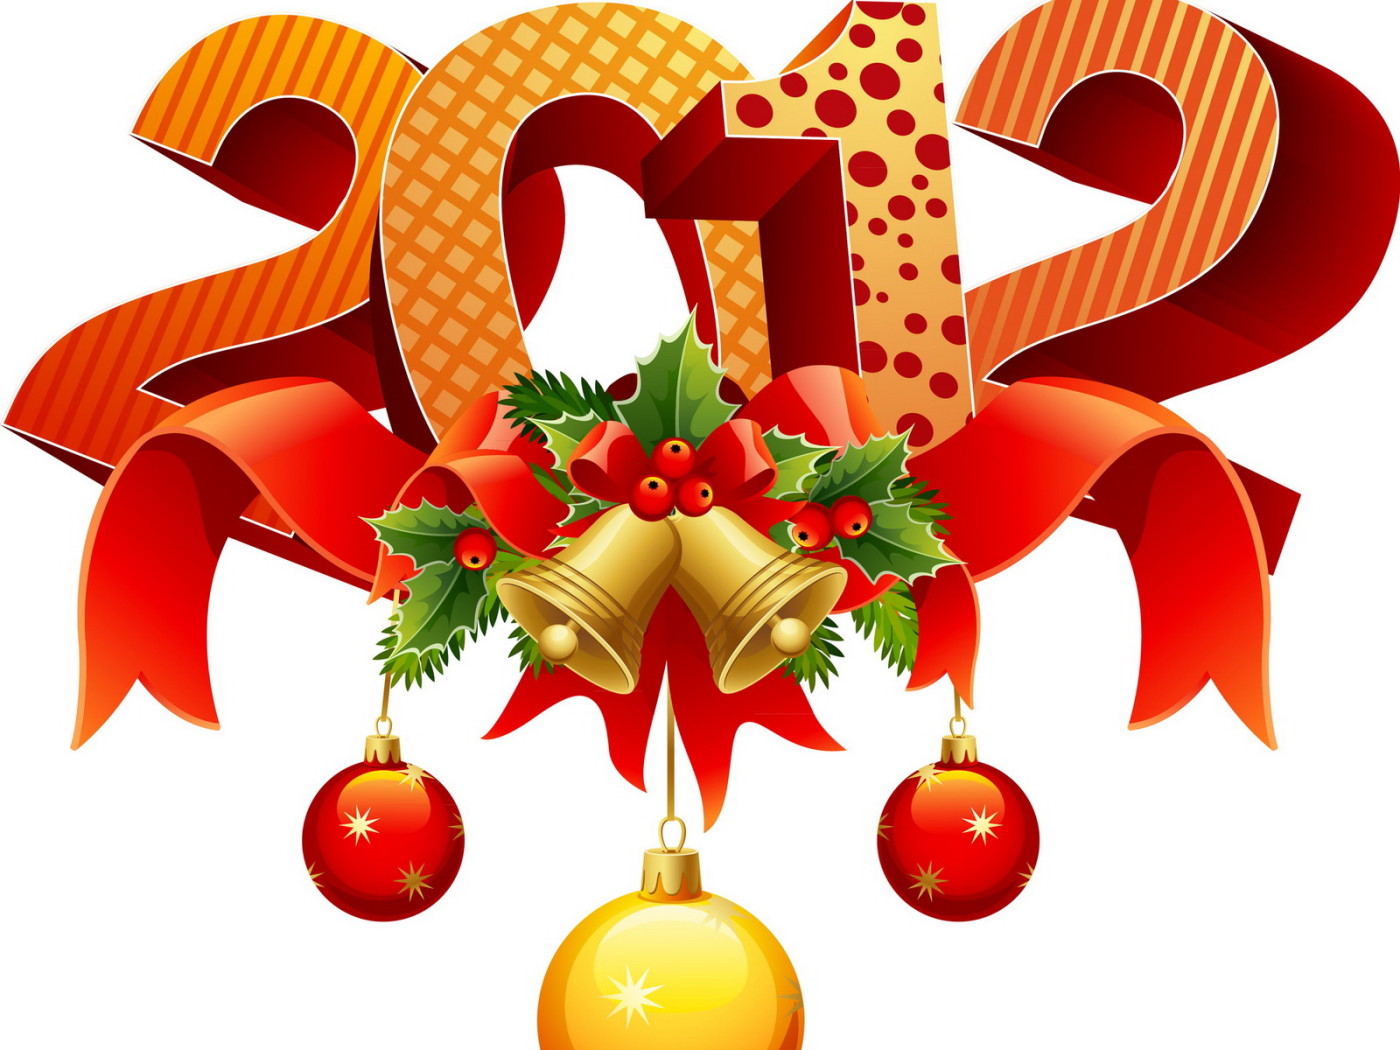 New Year 2012 High Quality Images and Wallpapers-17 1